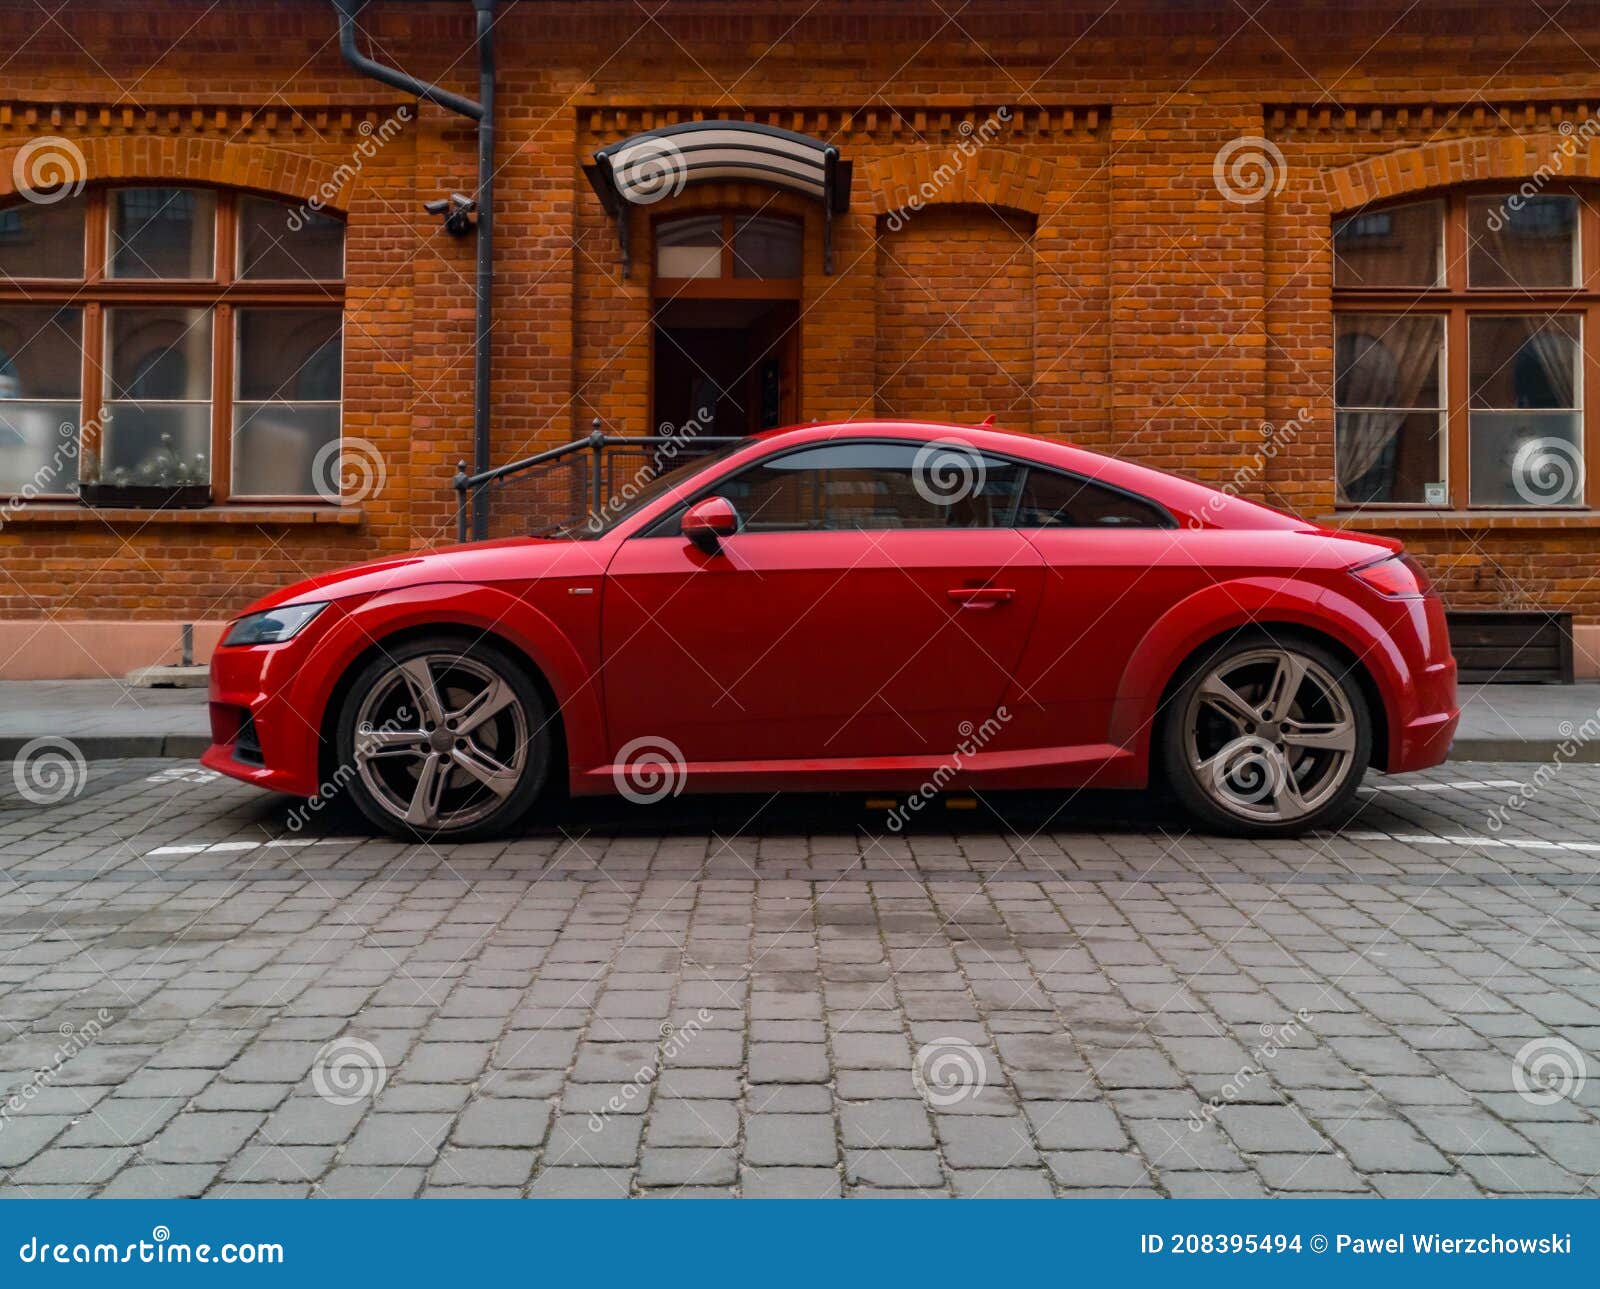 Red Audi TT in Front of Small Red Brick Building Stock Image - of design, automotive: 208395494